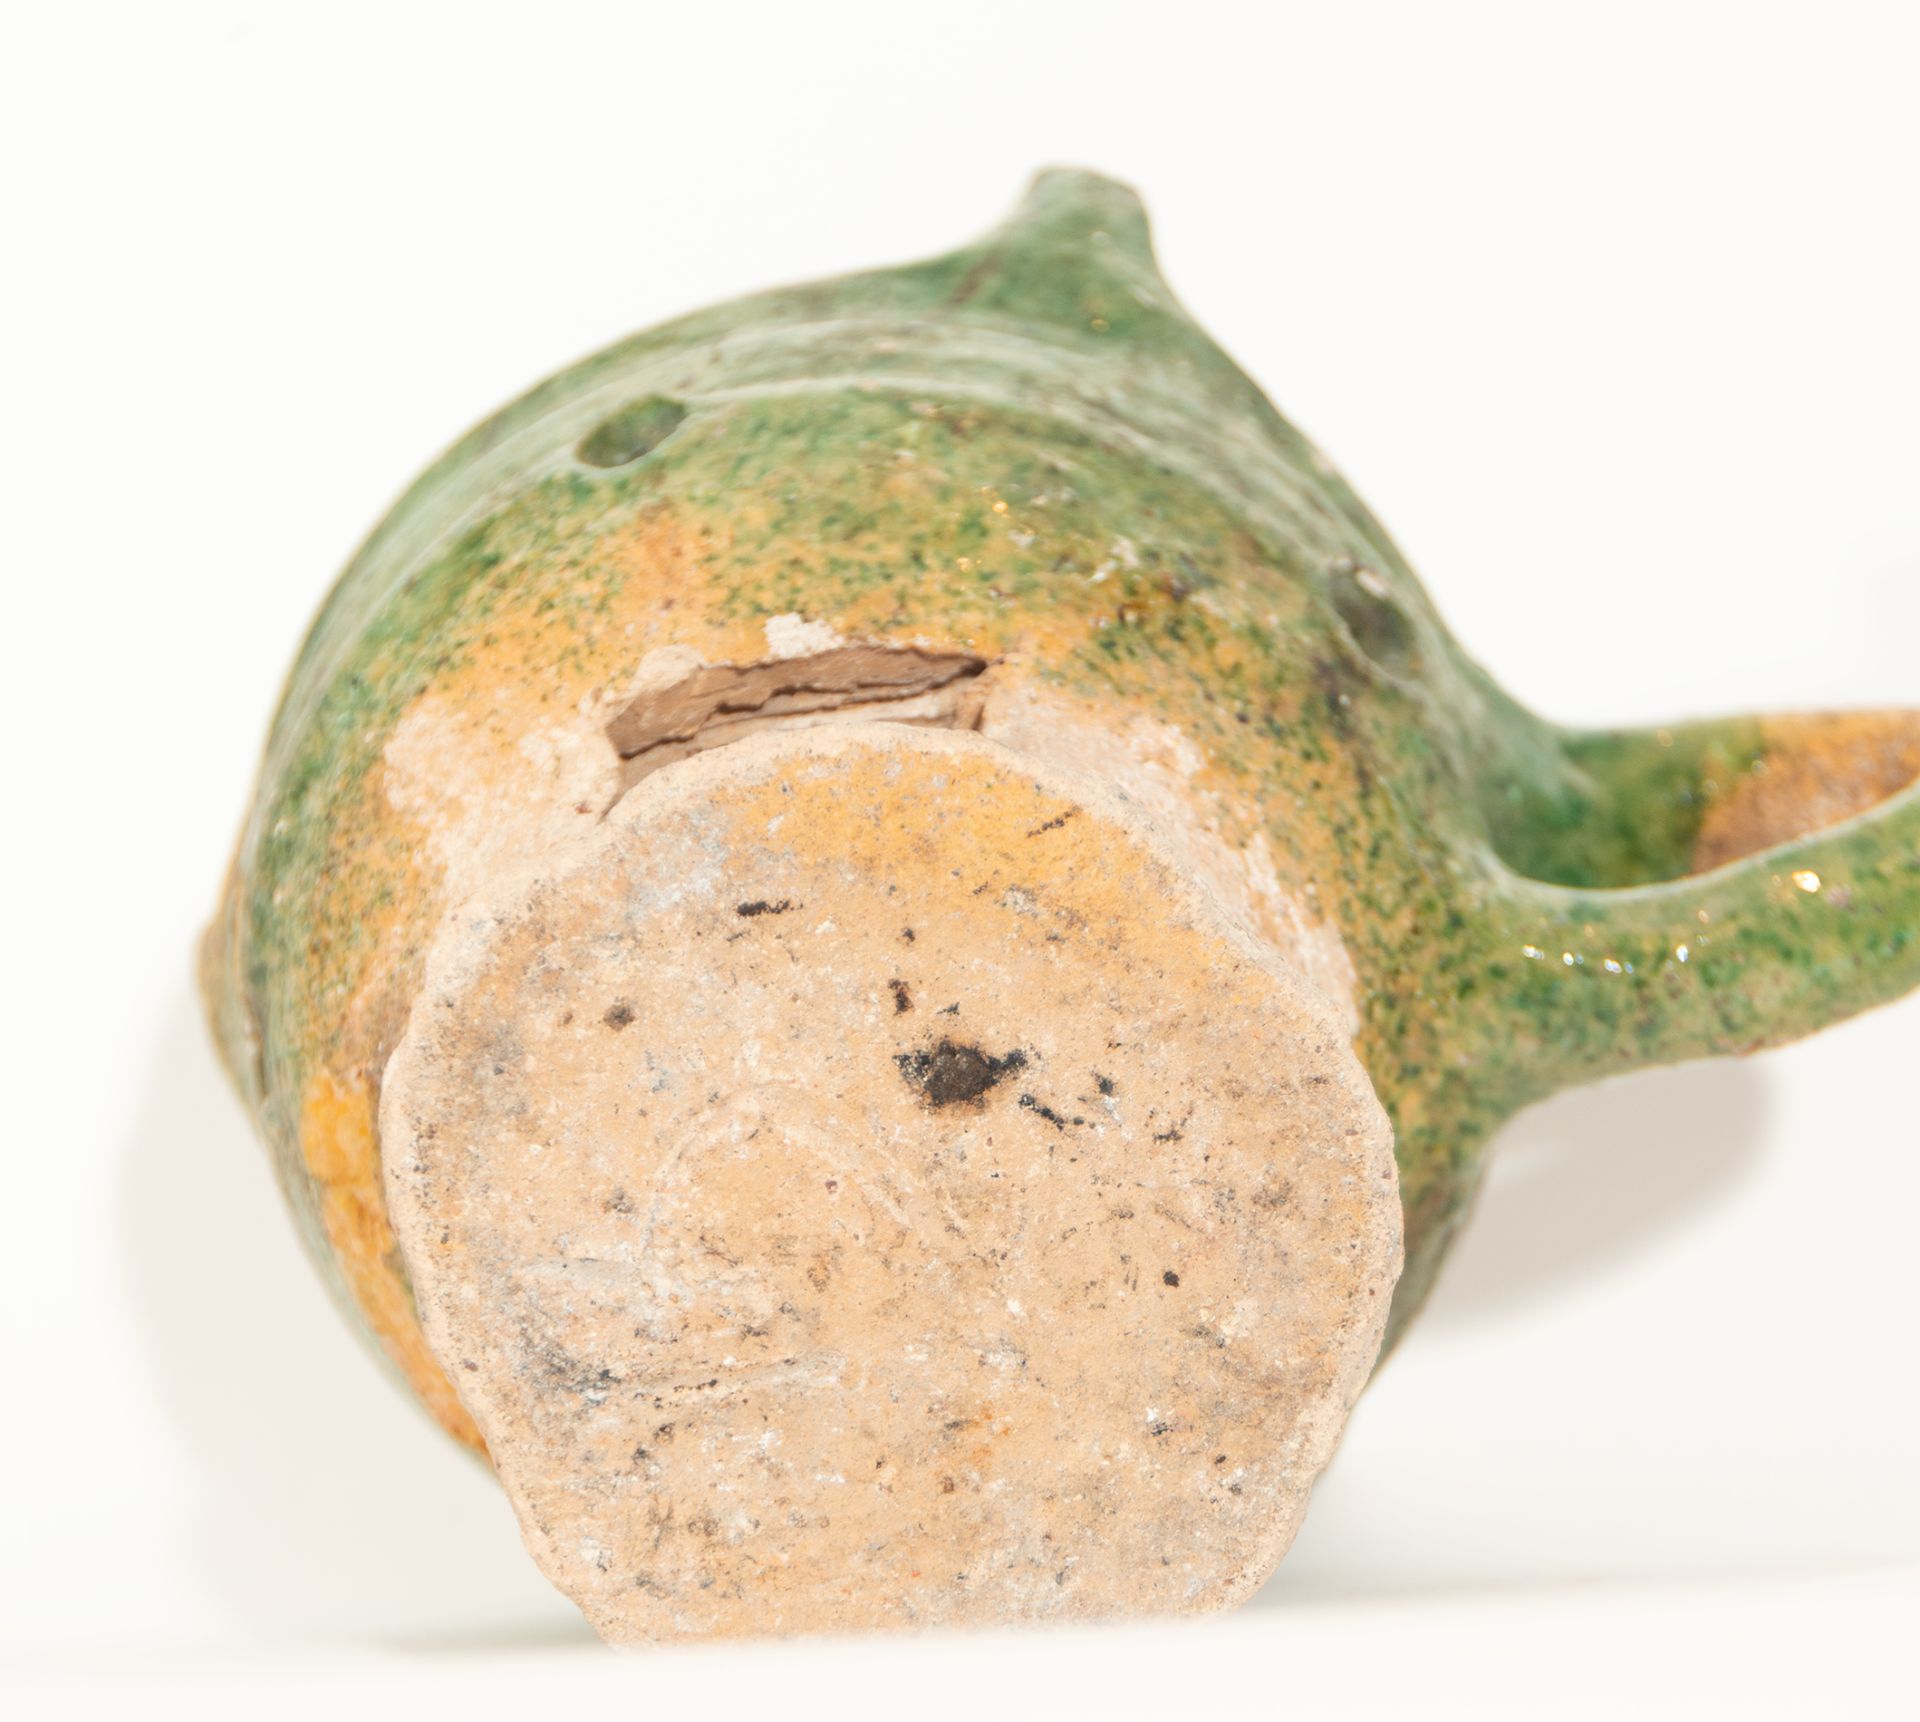 Nasrid candle holder in green-glazed ceramic, Granada school of the 13th - 15th centuries - Image 3 of 5